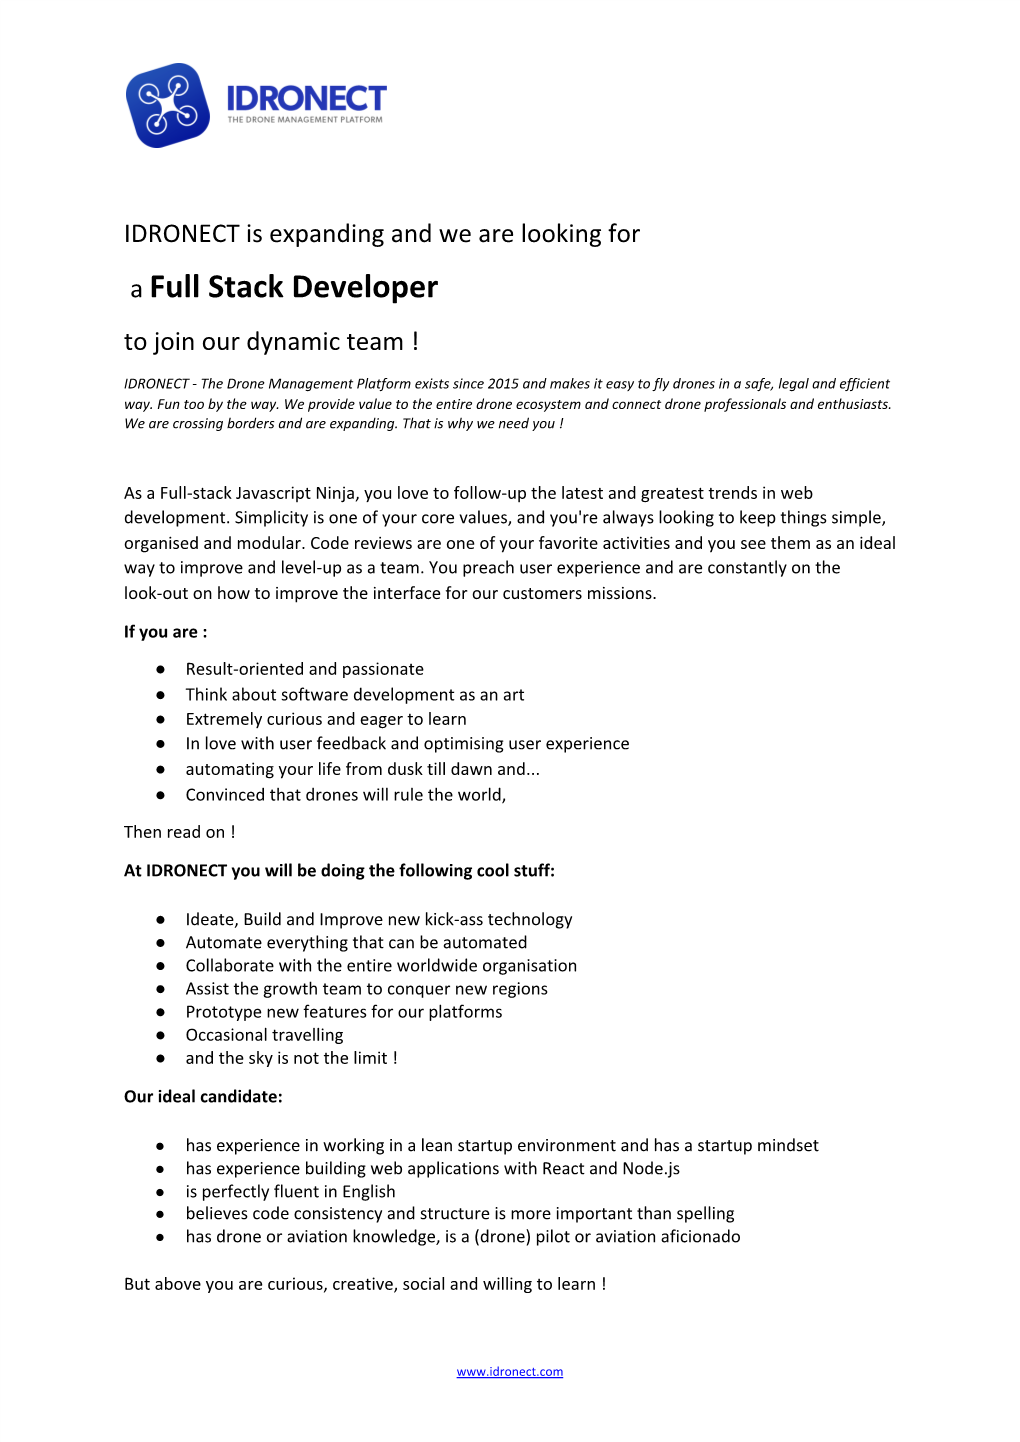 IDRONECT Is Expanding and We Are Looking for a ​Full Stack Developer